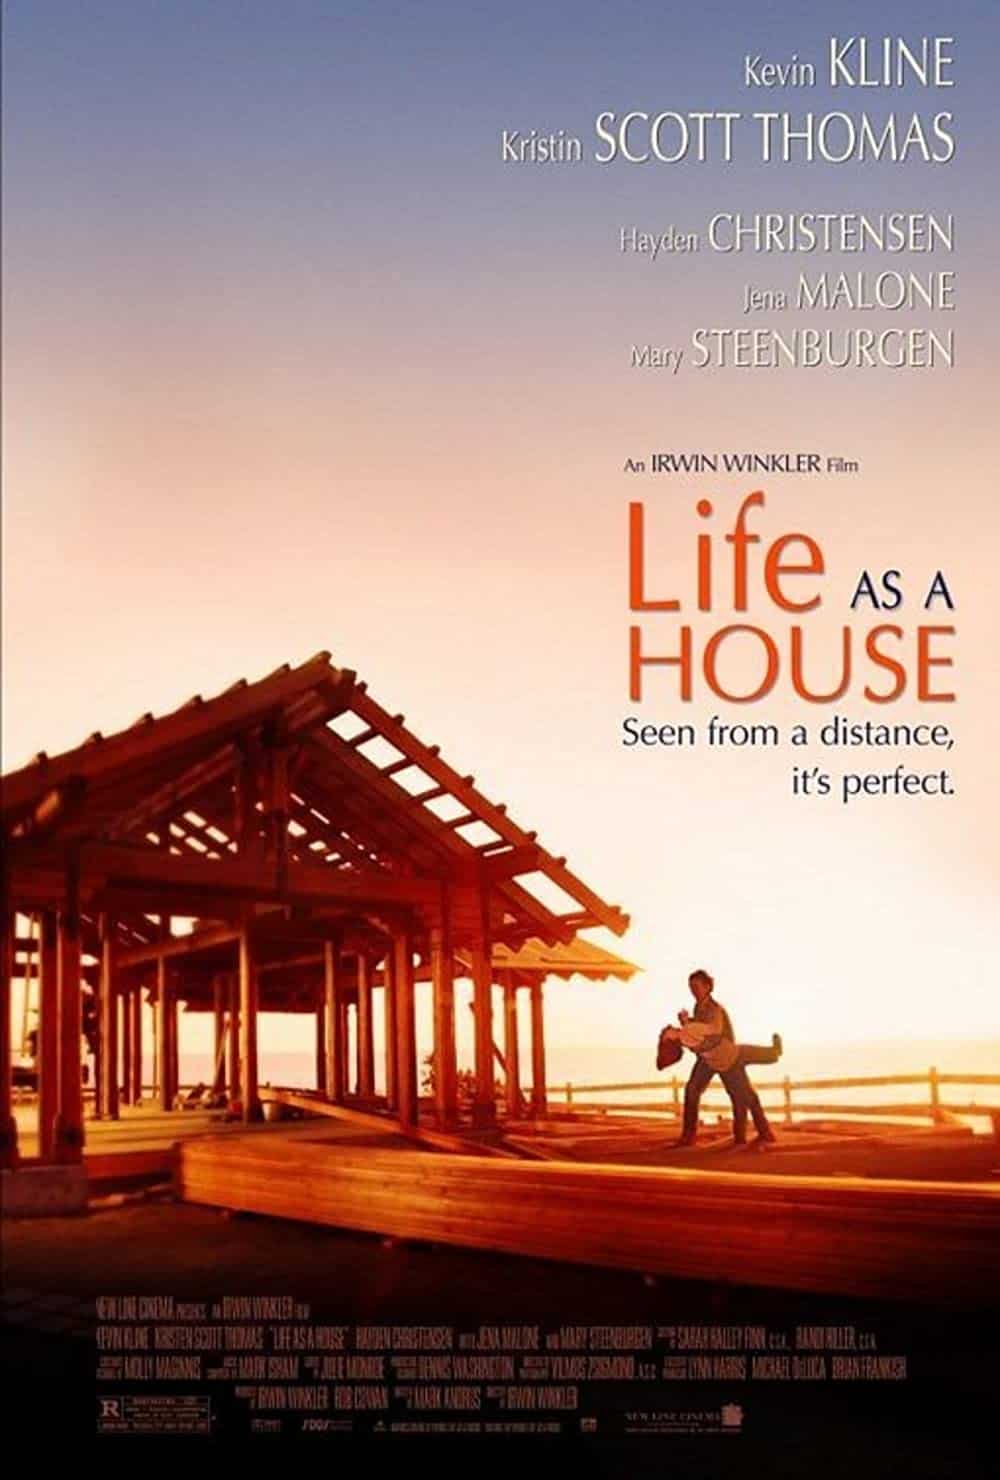 Life as a House (2001) Best Father-Son Movies to Add in Your Watchlist